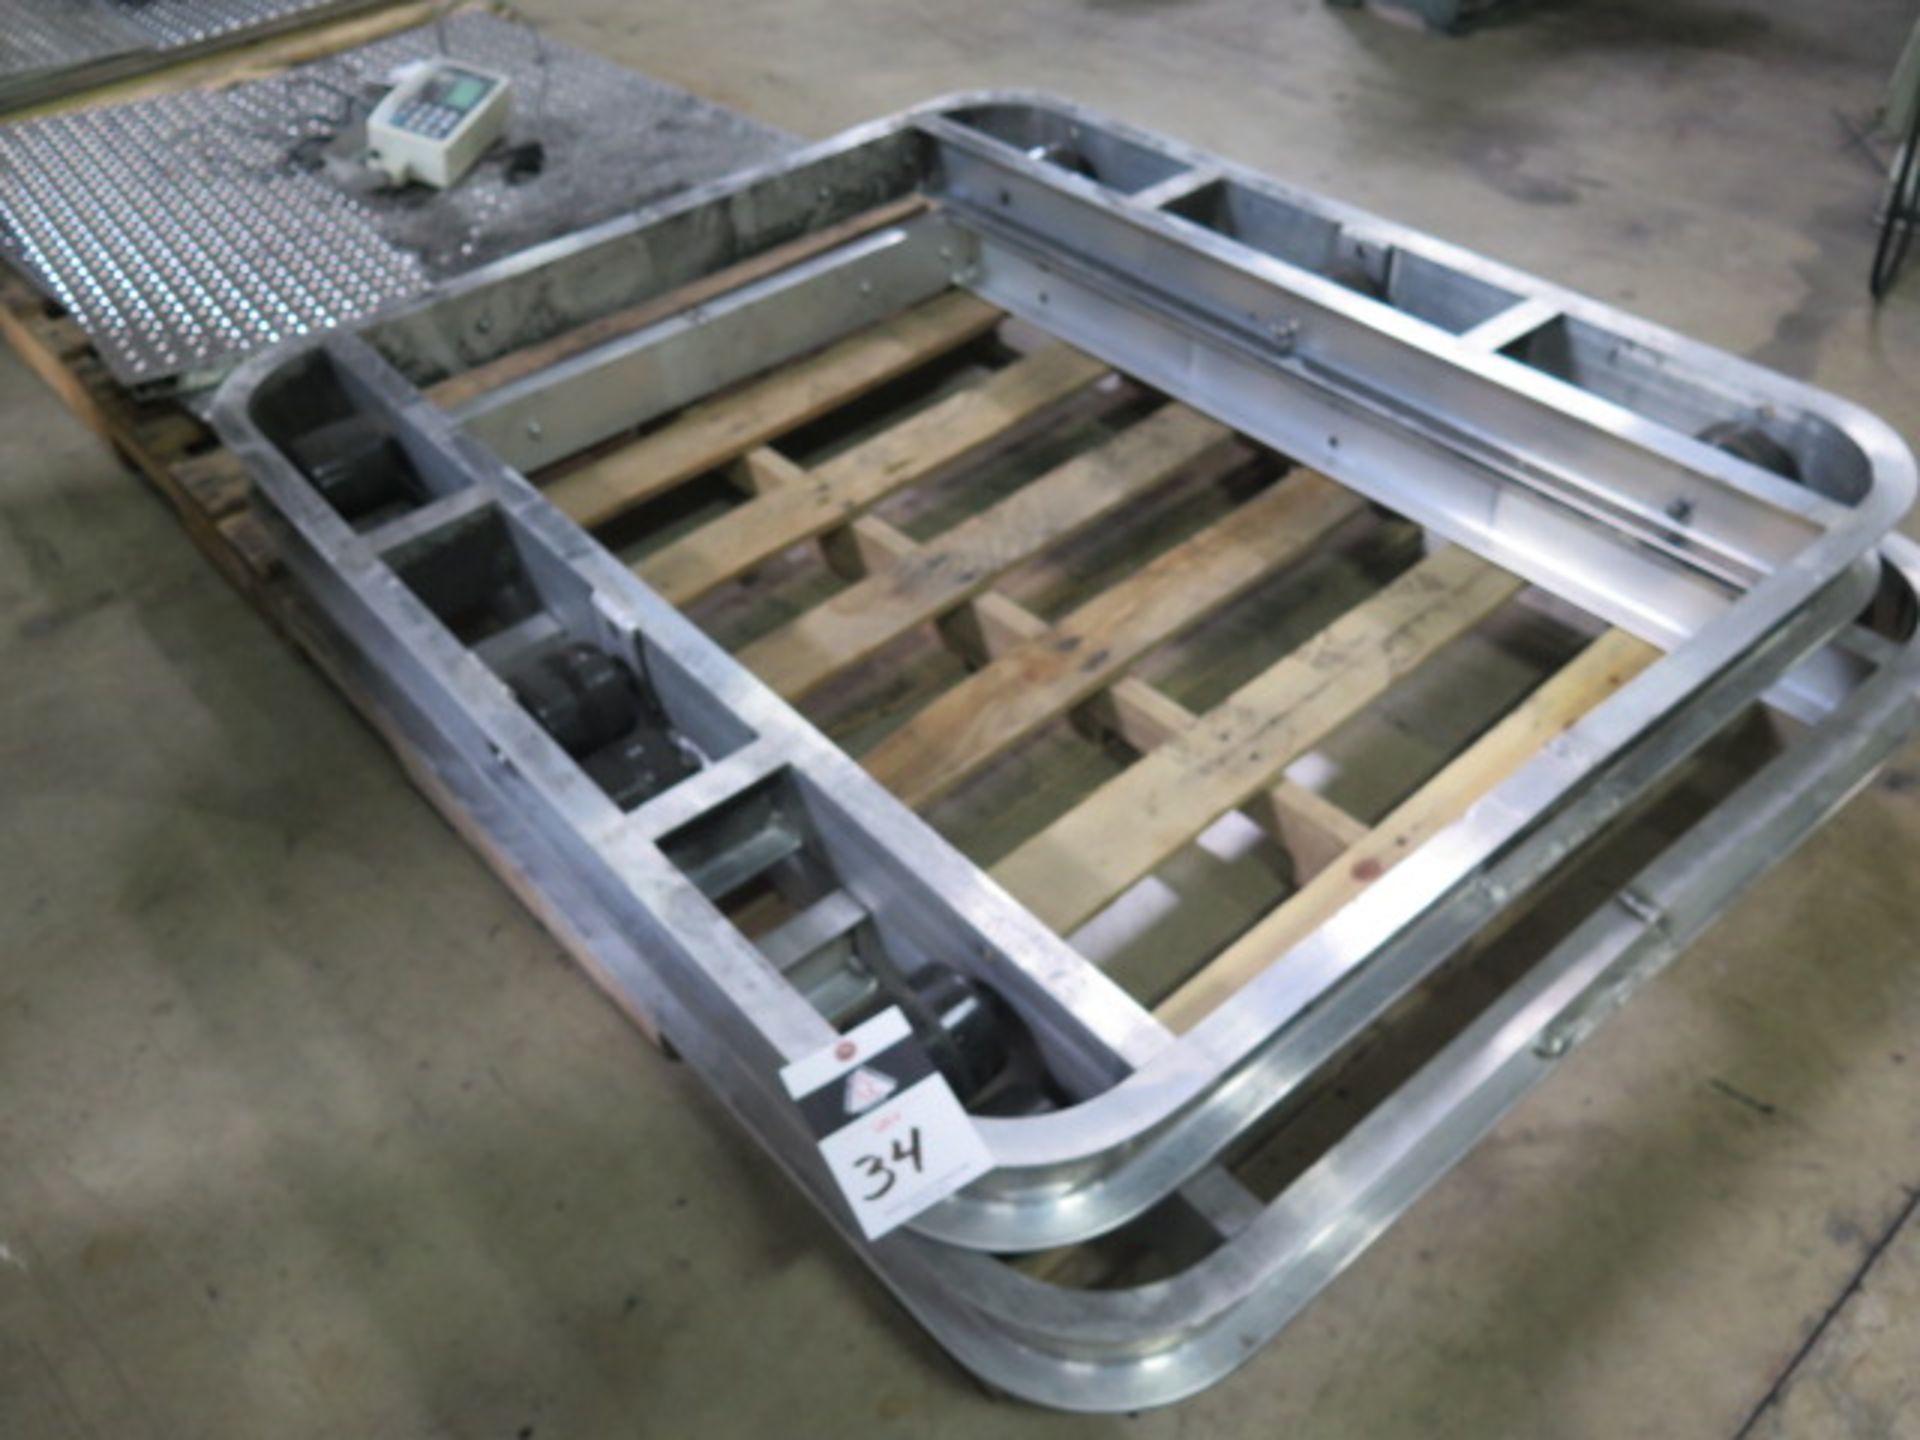 Aluminum Pallet Dolleys (2), SOLD AS IS WITH NO WARRANTY